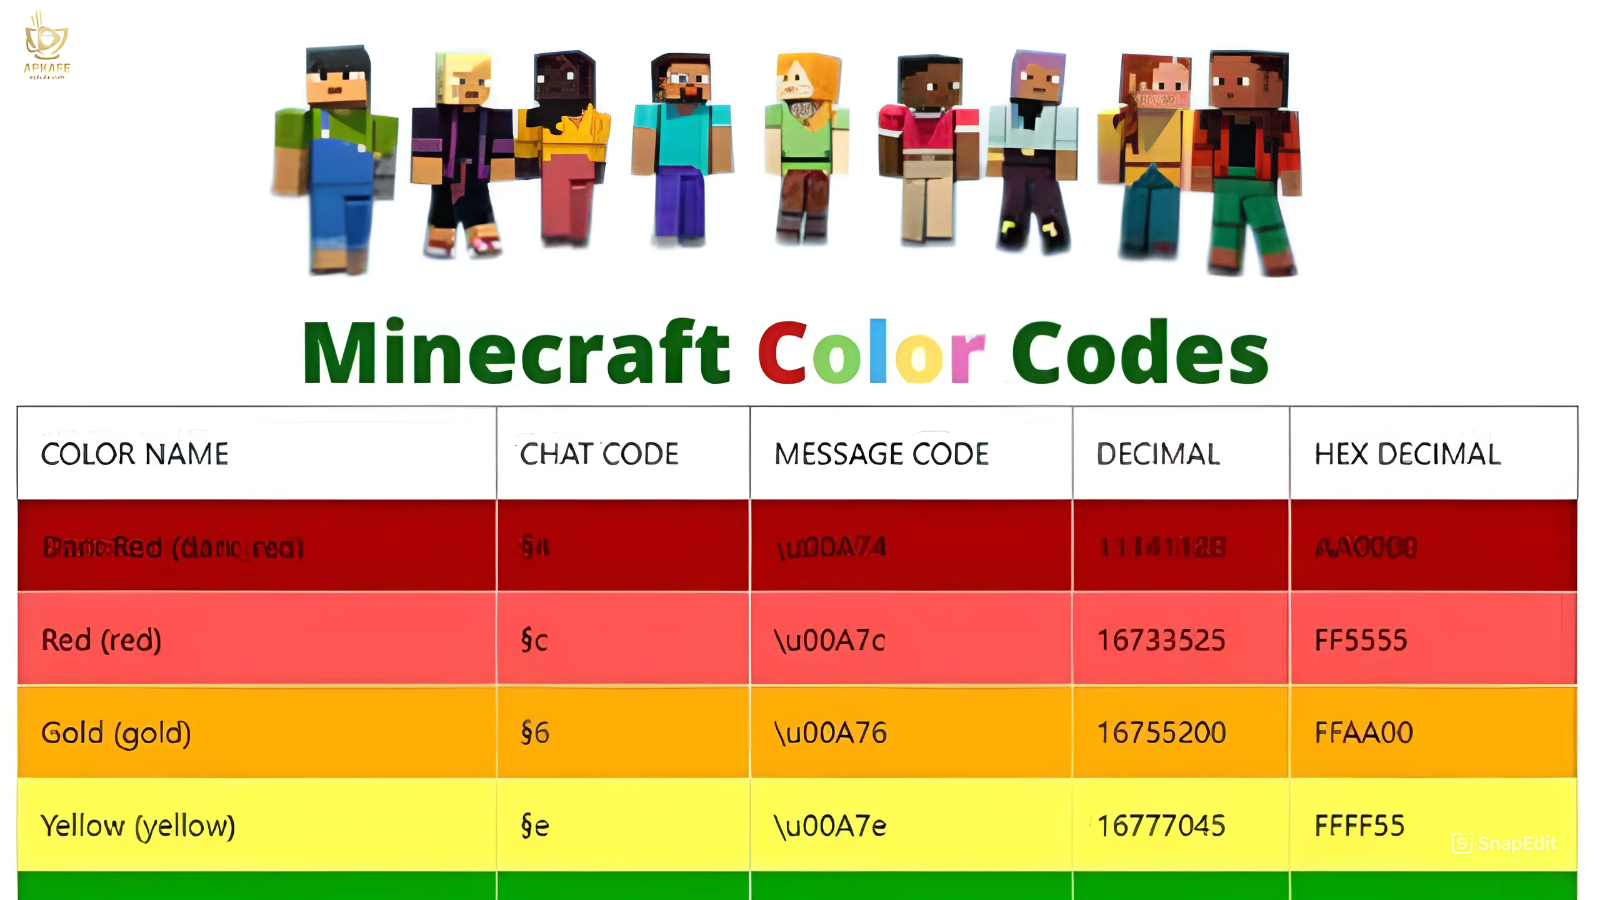 Master Minecraft Color Codes: Brighten Up Your Game!